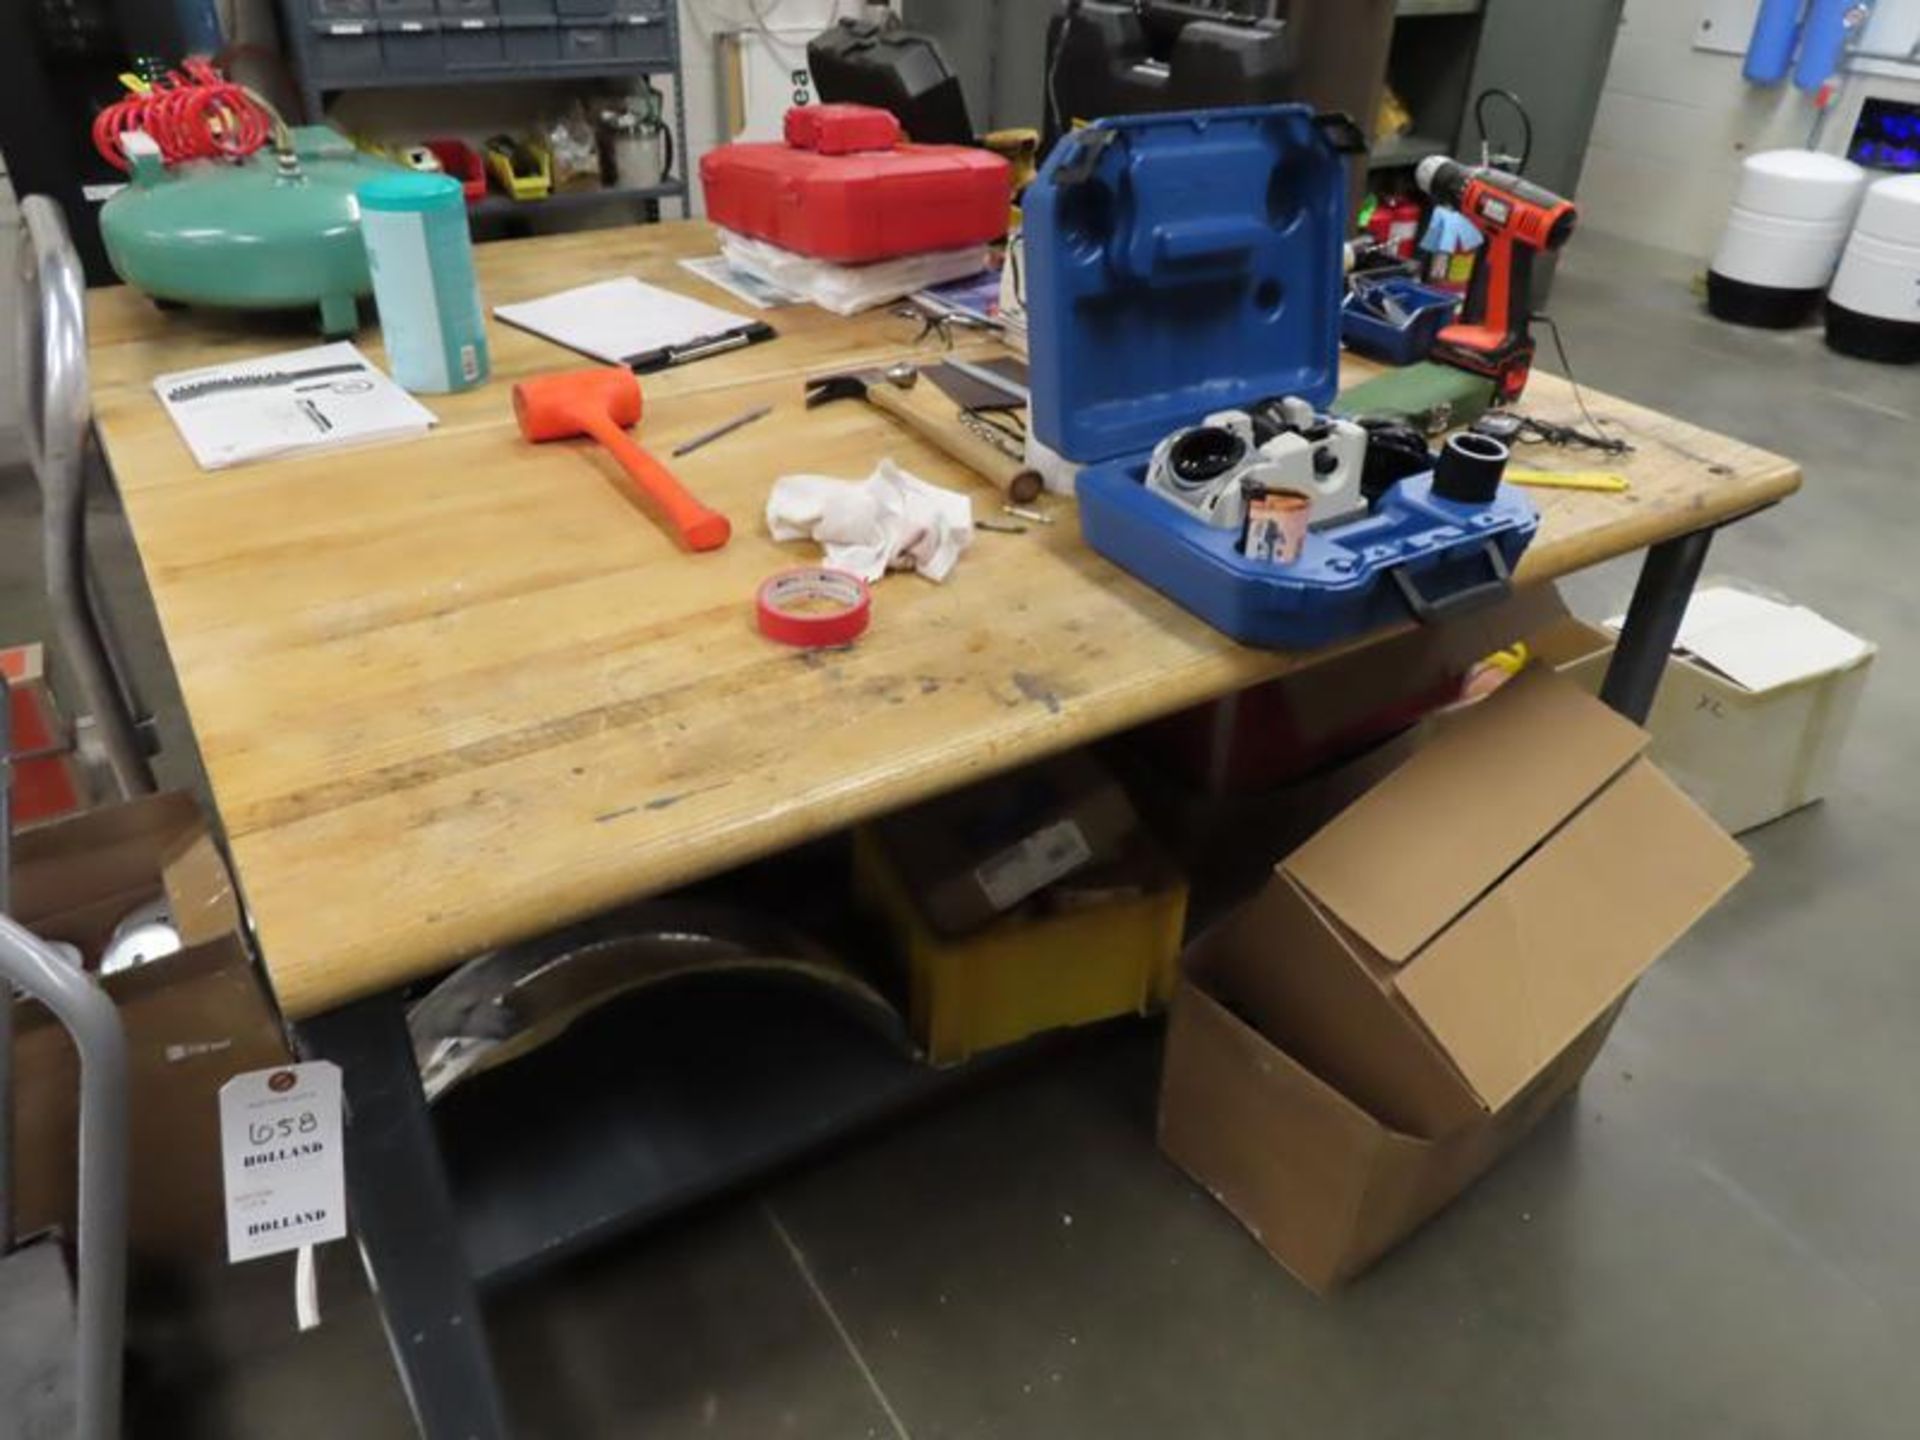 Two Work Benches and contents including pancake air compressor, DeWalt Drill, Drill Doctor Bit Sharp